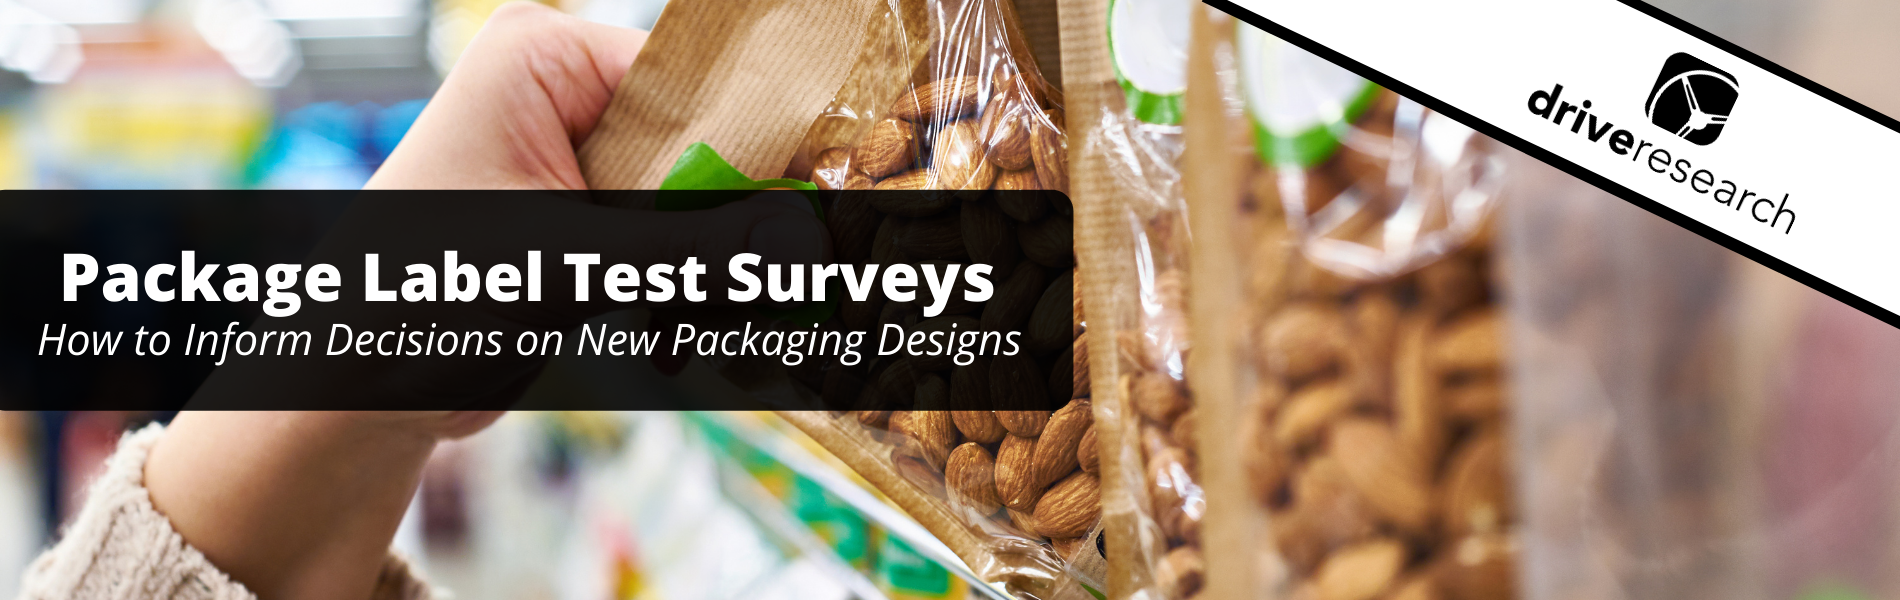 Package Label Test Surveys: How to Inform Decisions on New Packaging Designs